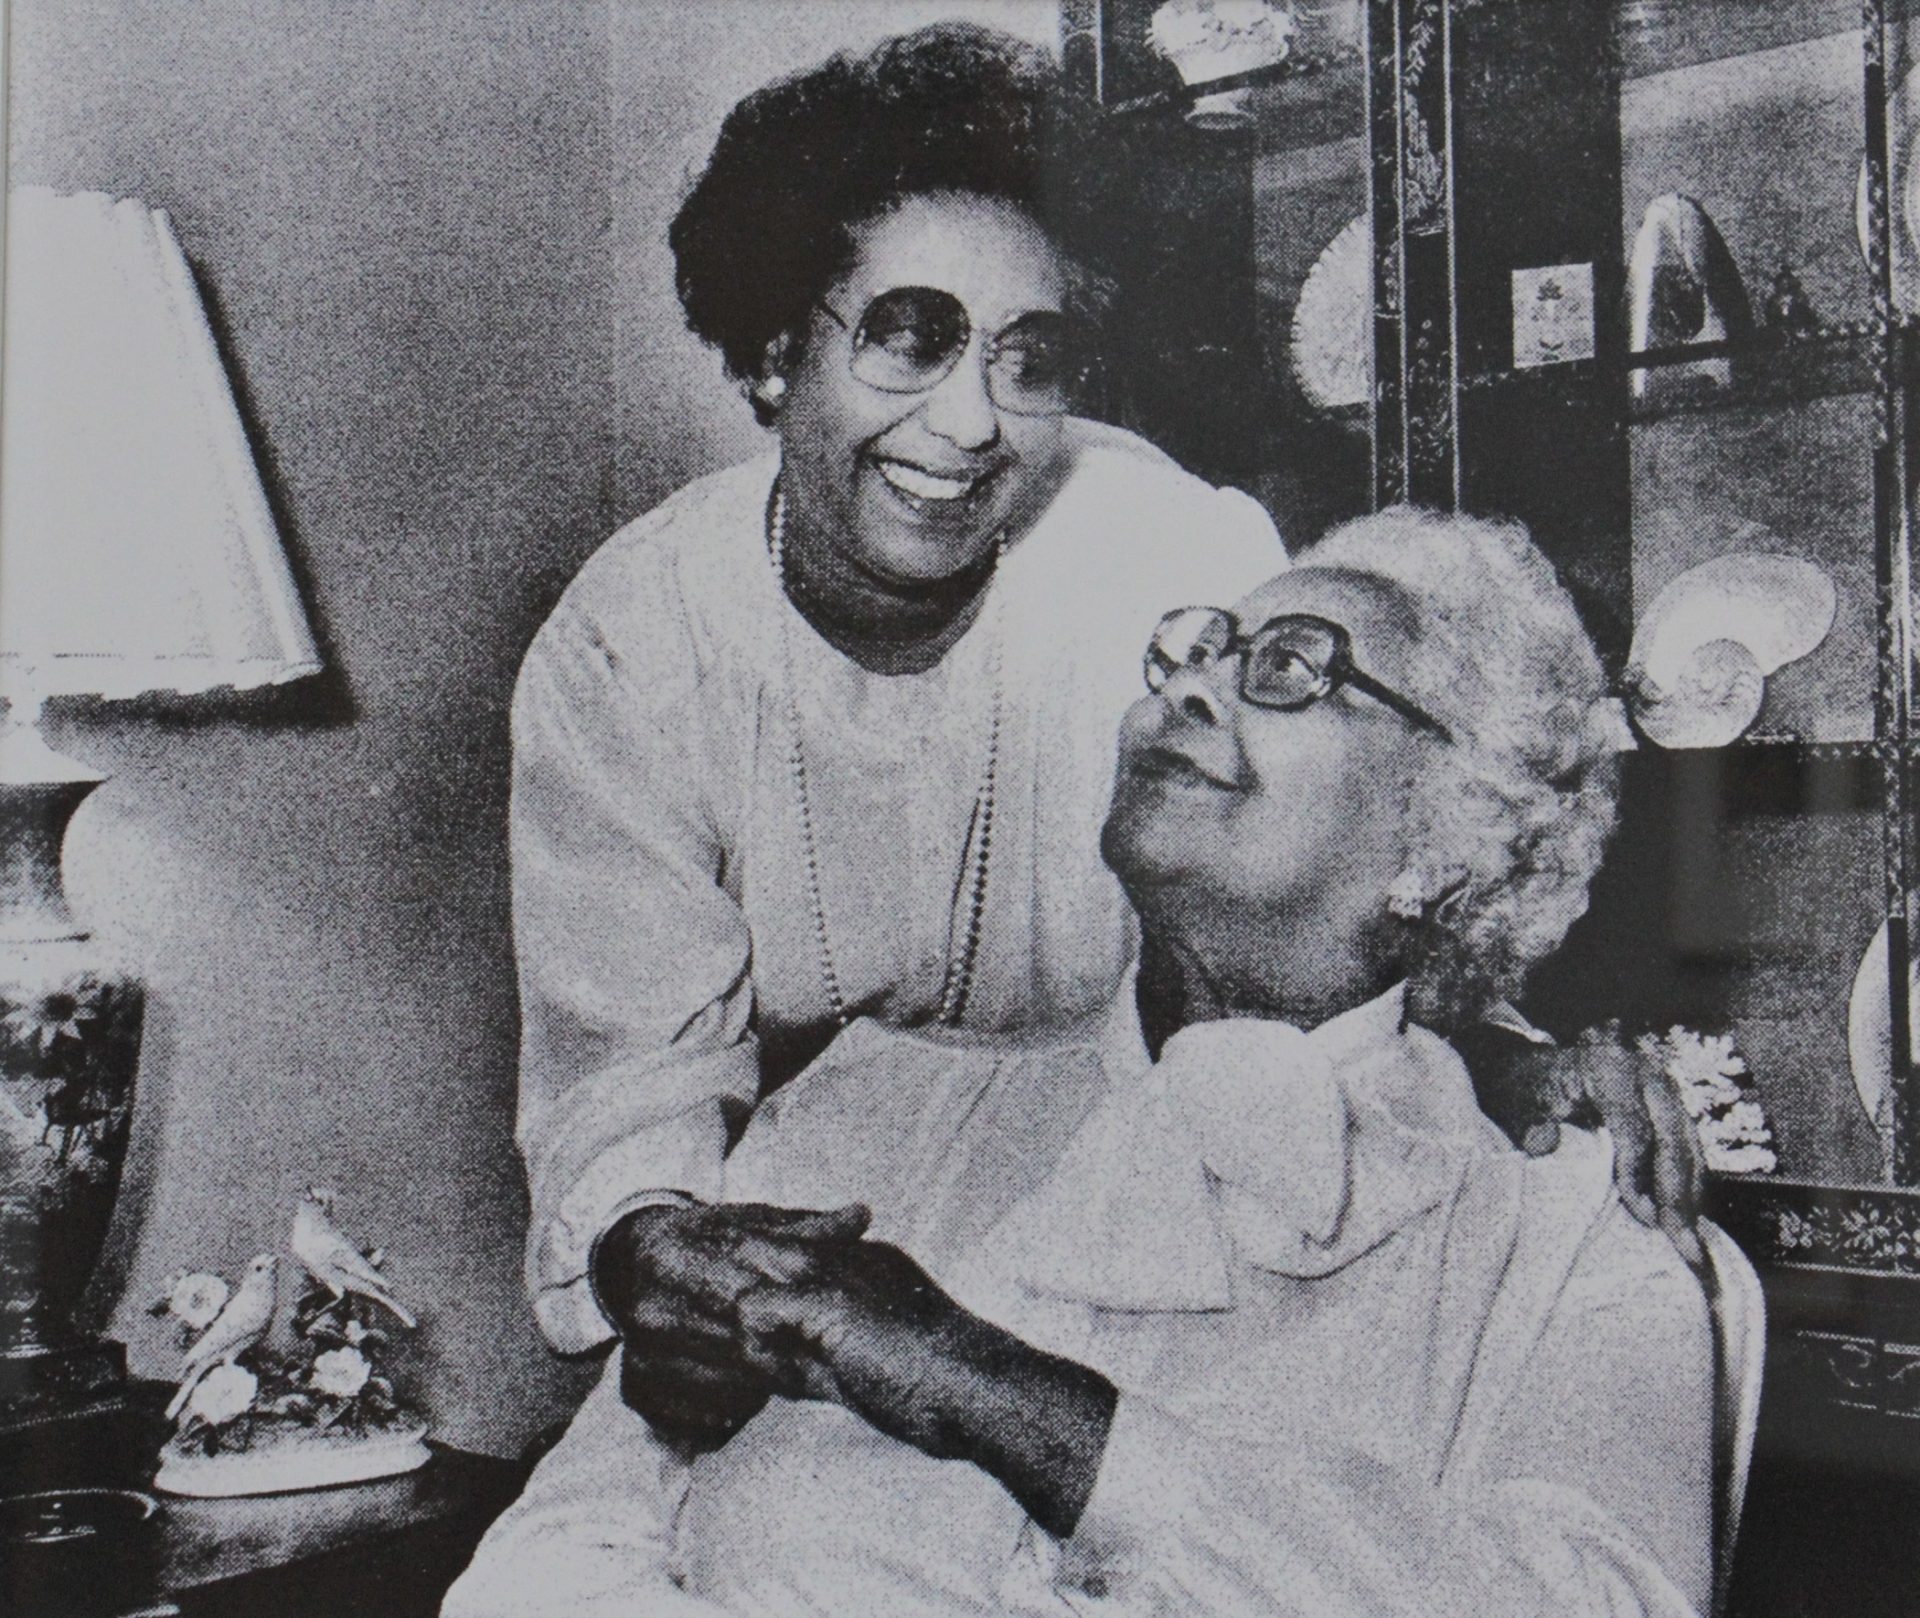 Dr. Constance E. Clayton is photographed with her mother, Williabell Clayton, in whose honor 78 artworks were donated to Pennsylvania Academy of Fine Arts.